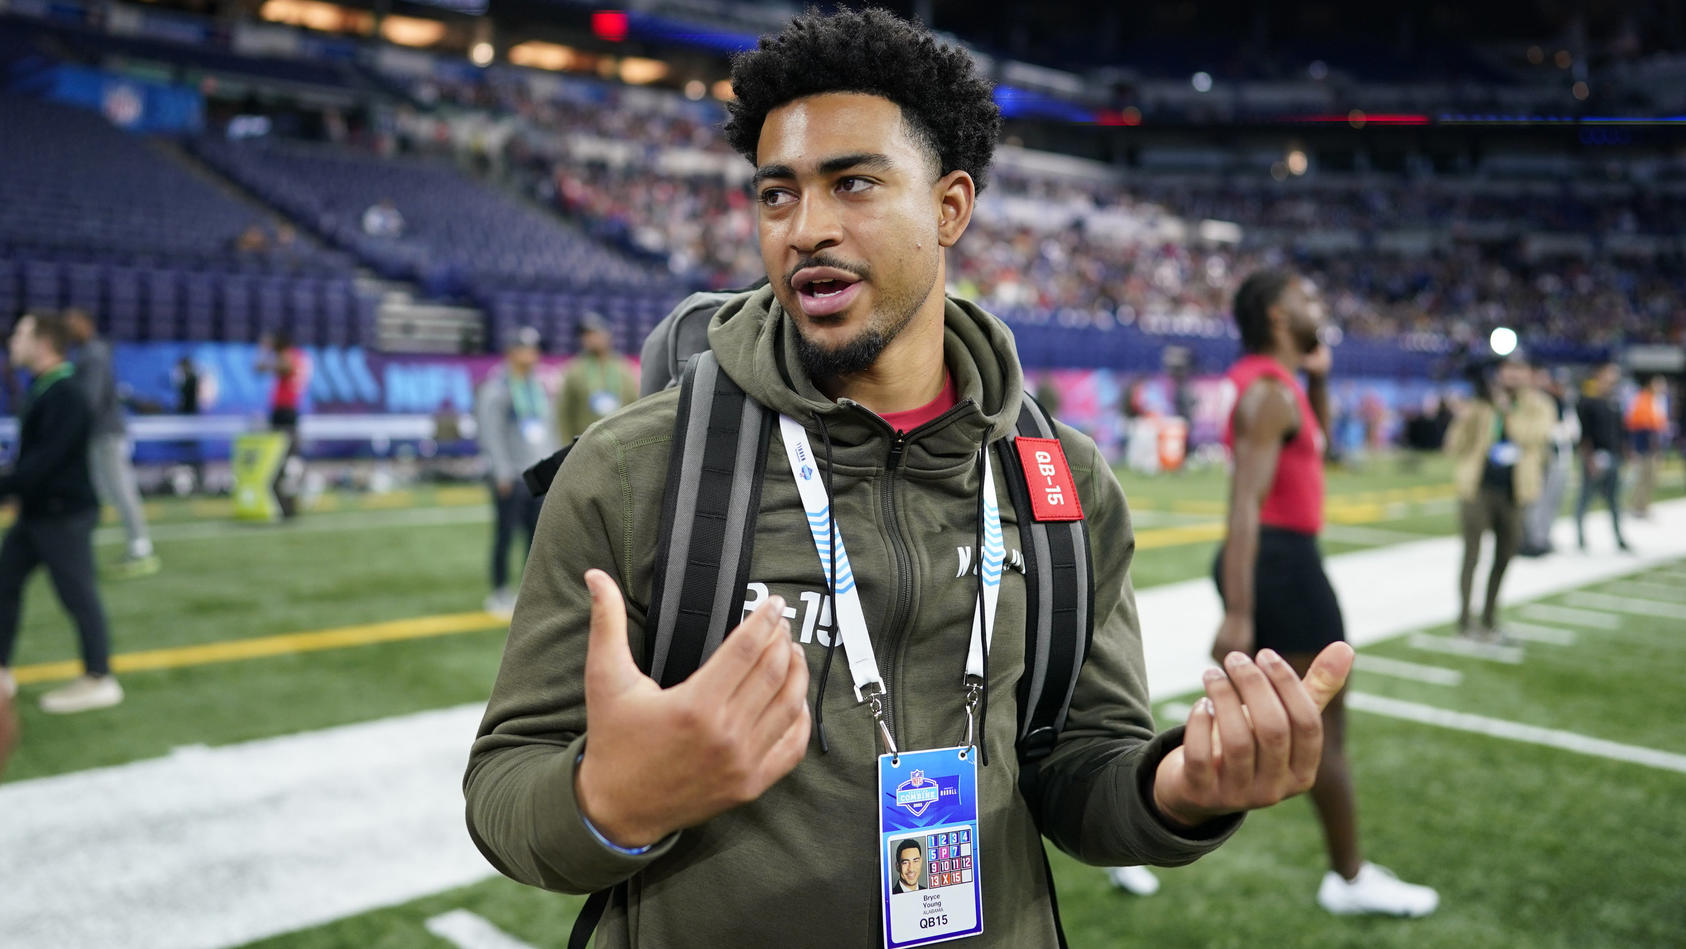 Alabama quarterback Bryce Young talks on the field during the NFL football scouting combine in Indianapolis, Saturday, March 4, 2023. (AP Photo/Darron Cummings)